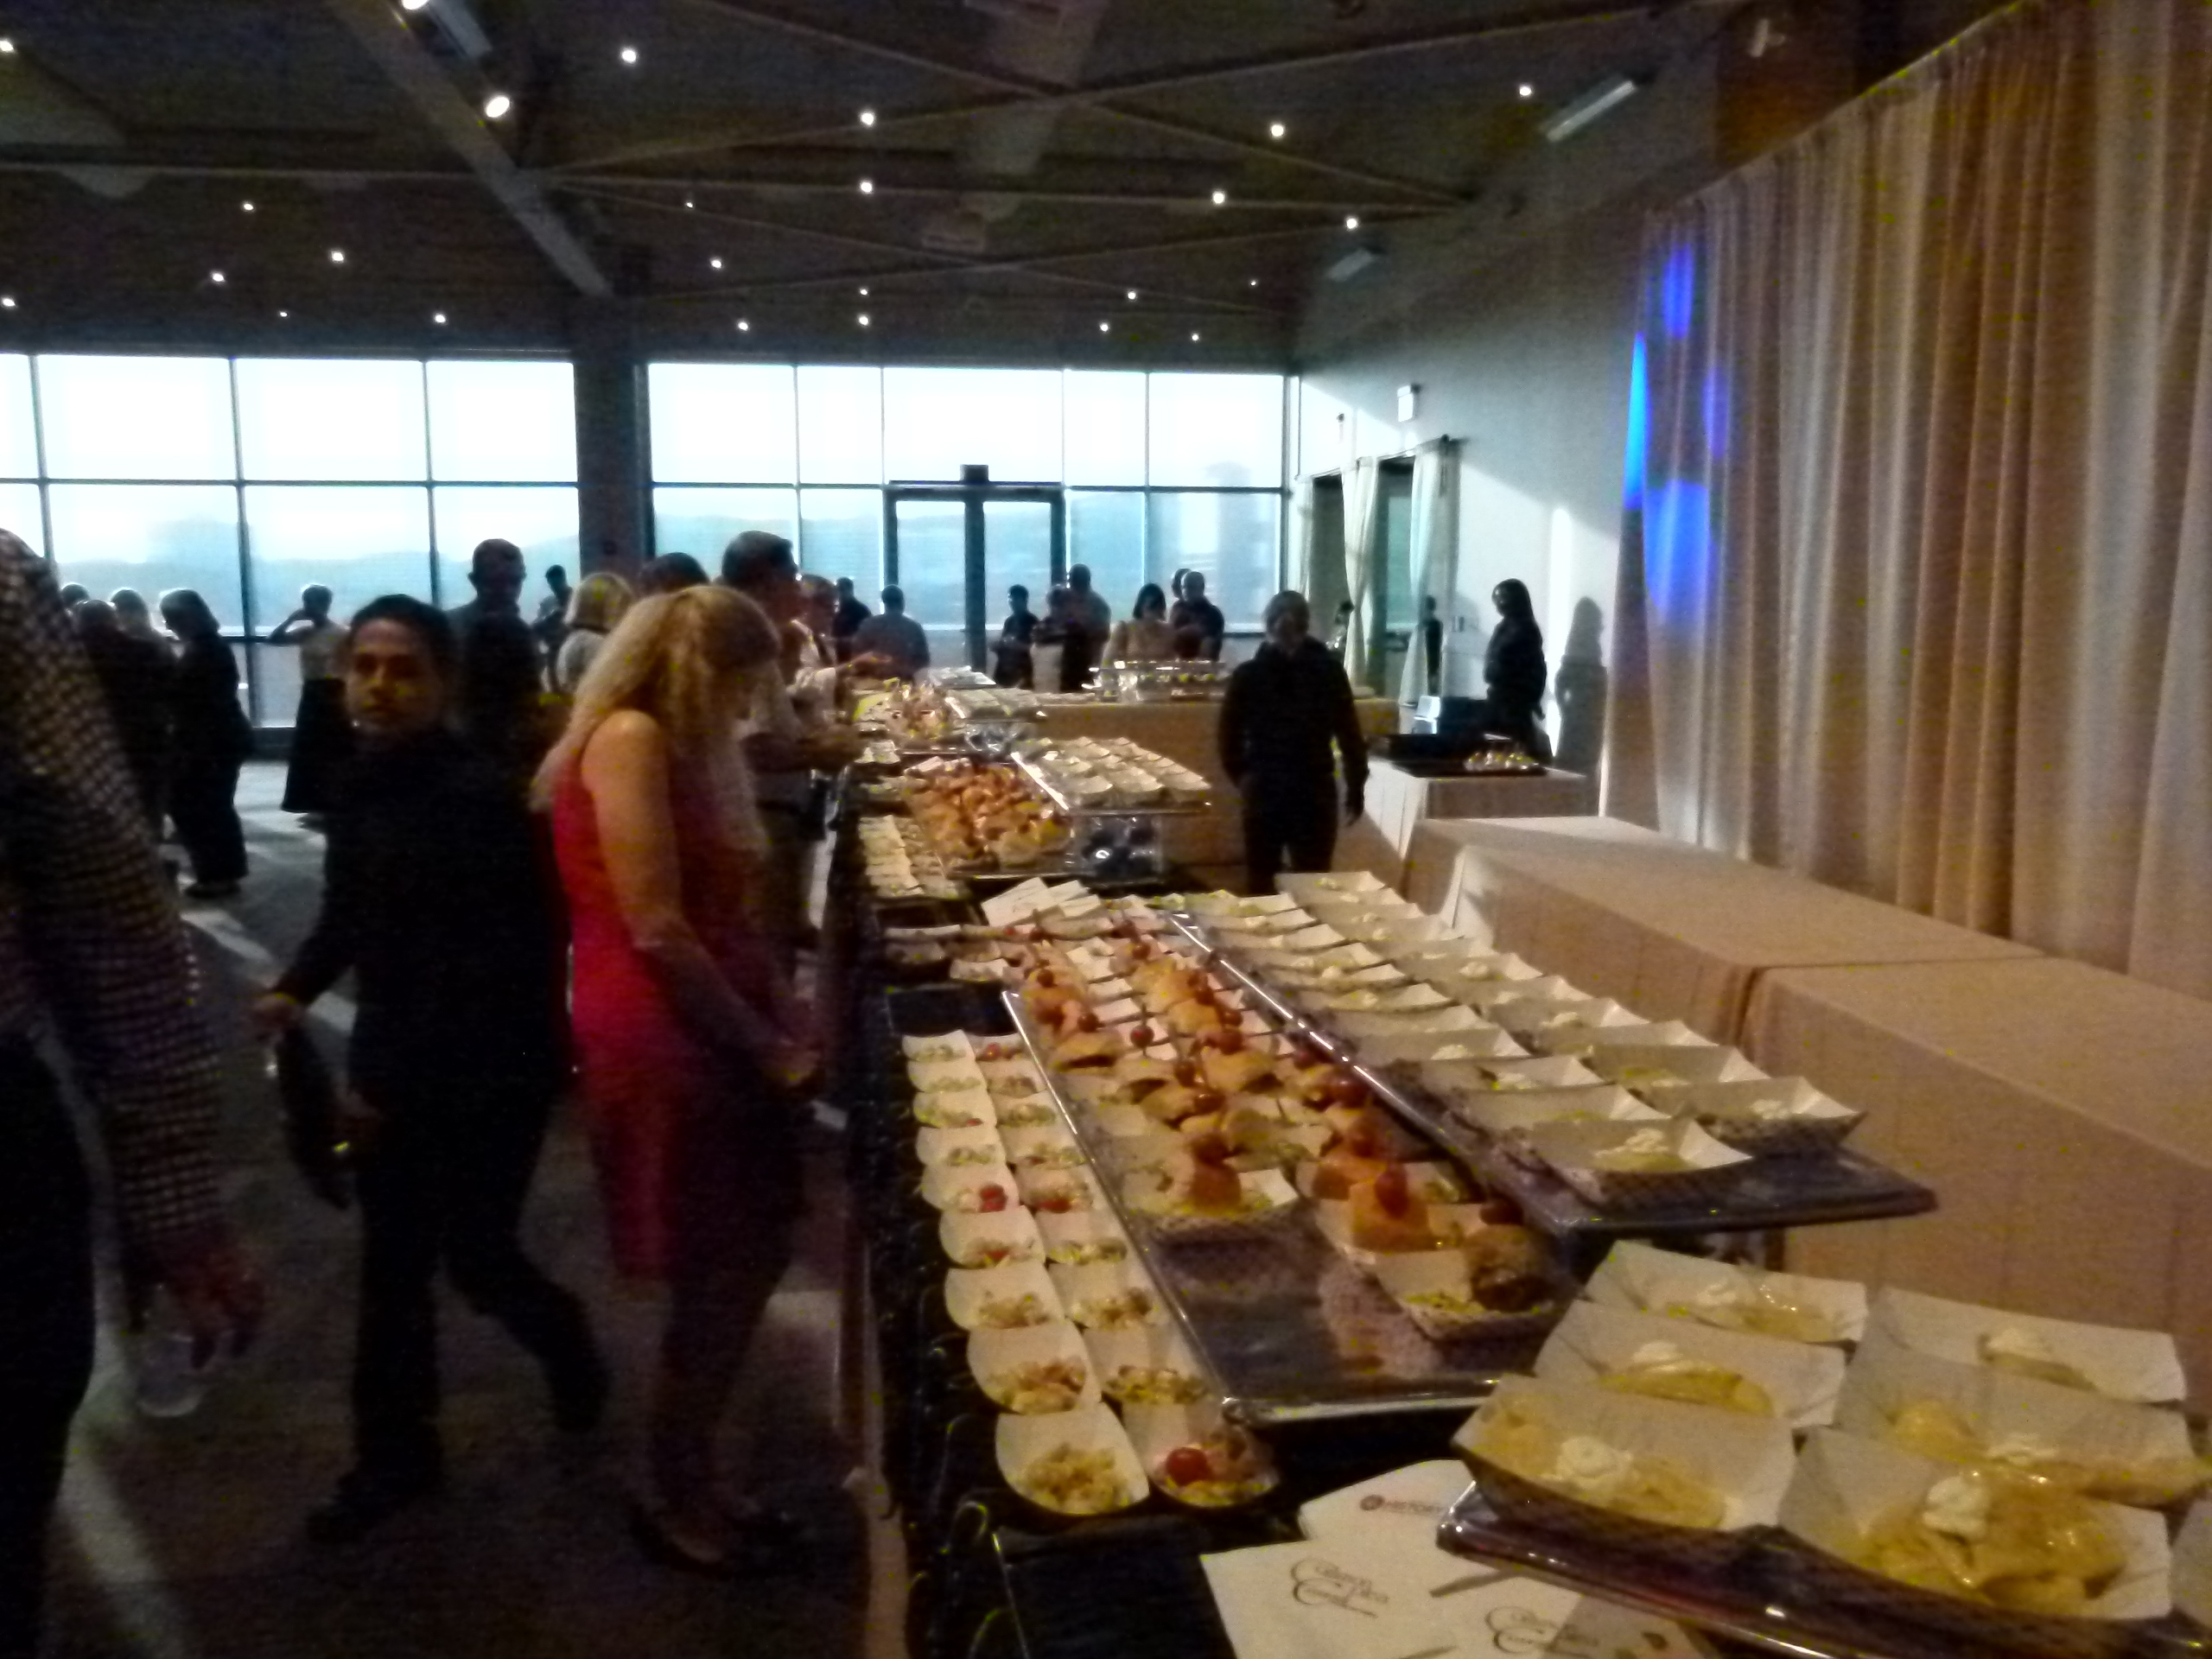 The buffet ran almost the entire length of the room.